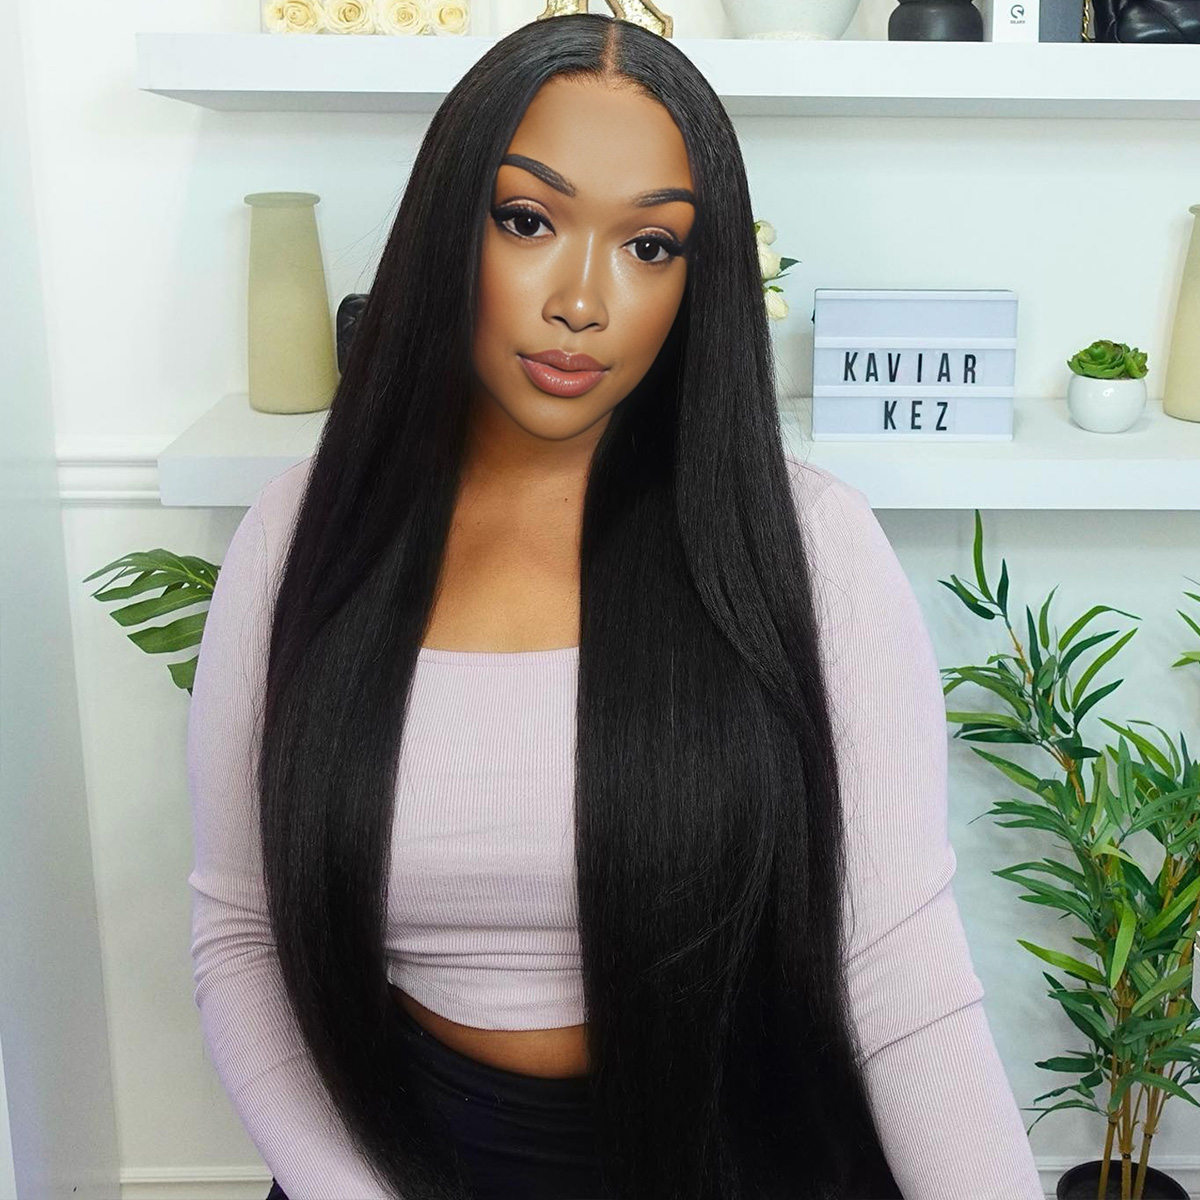 kinky straight wear and go pre cut lace wig